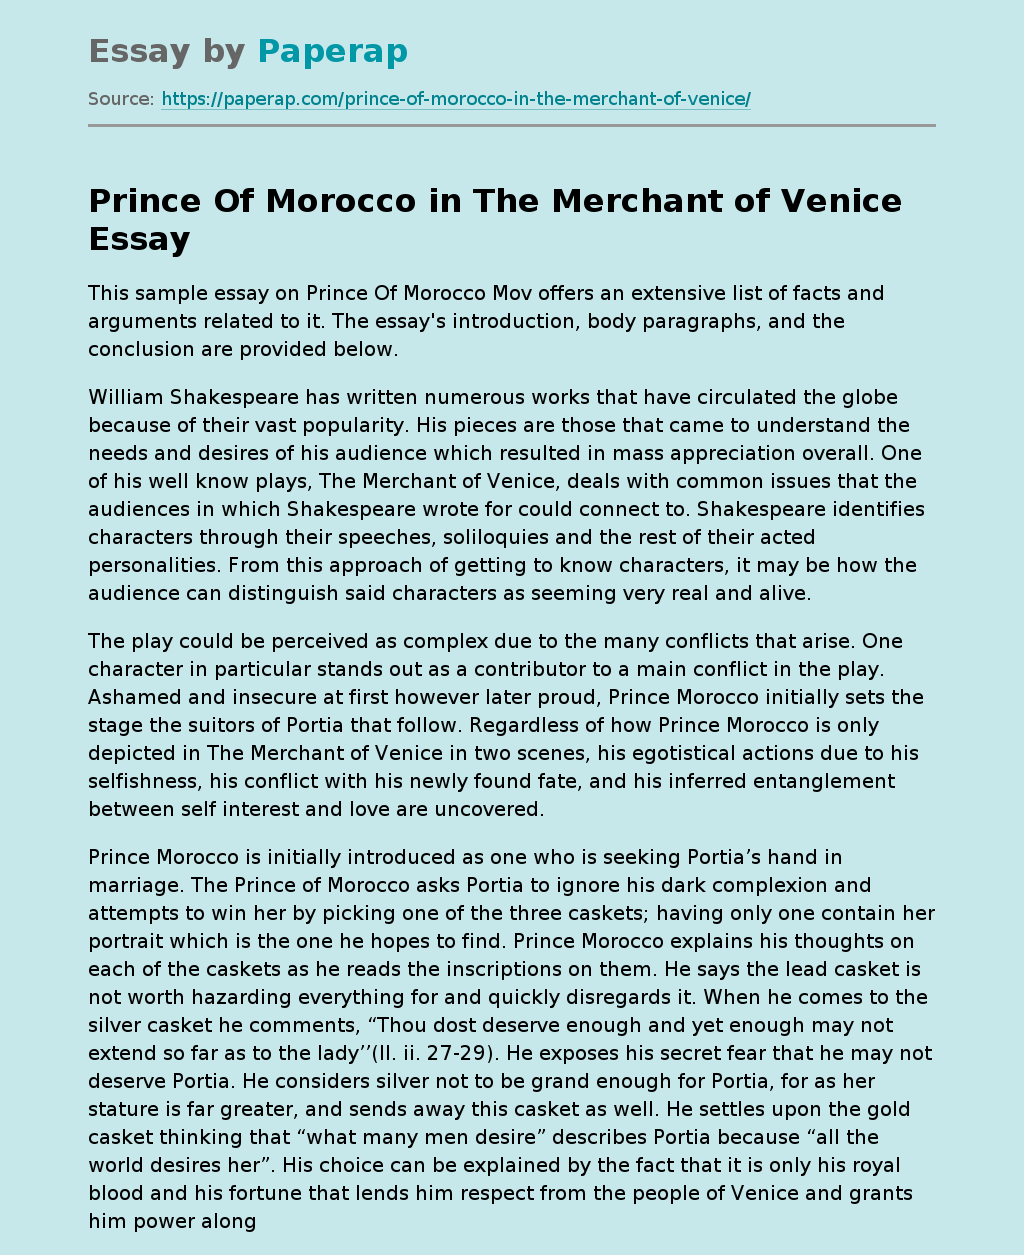 Prince Of Morocco in The Merchant of Venice